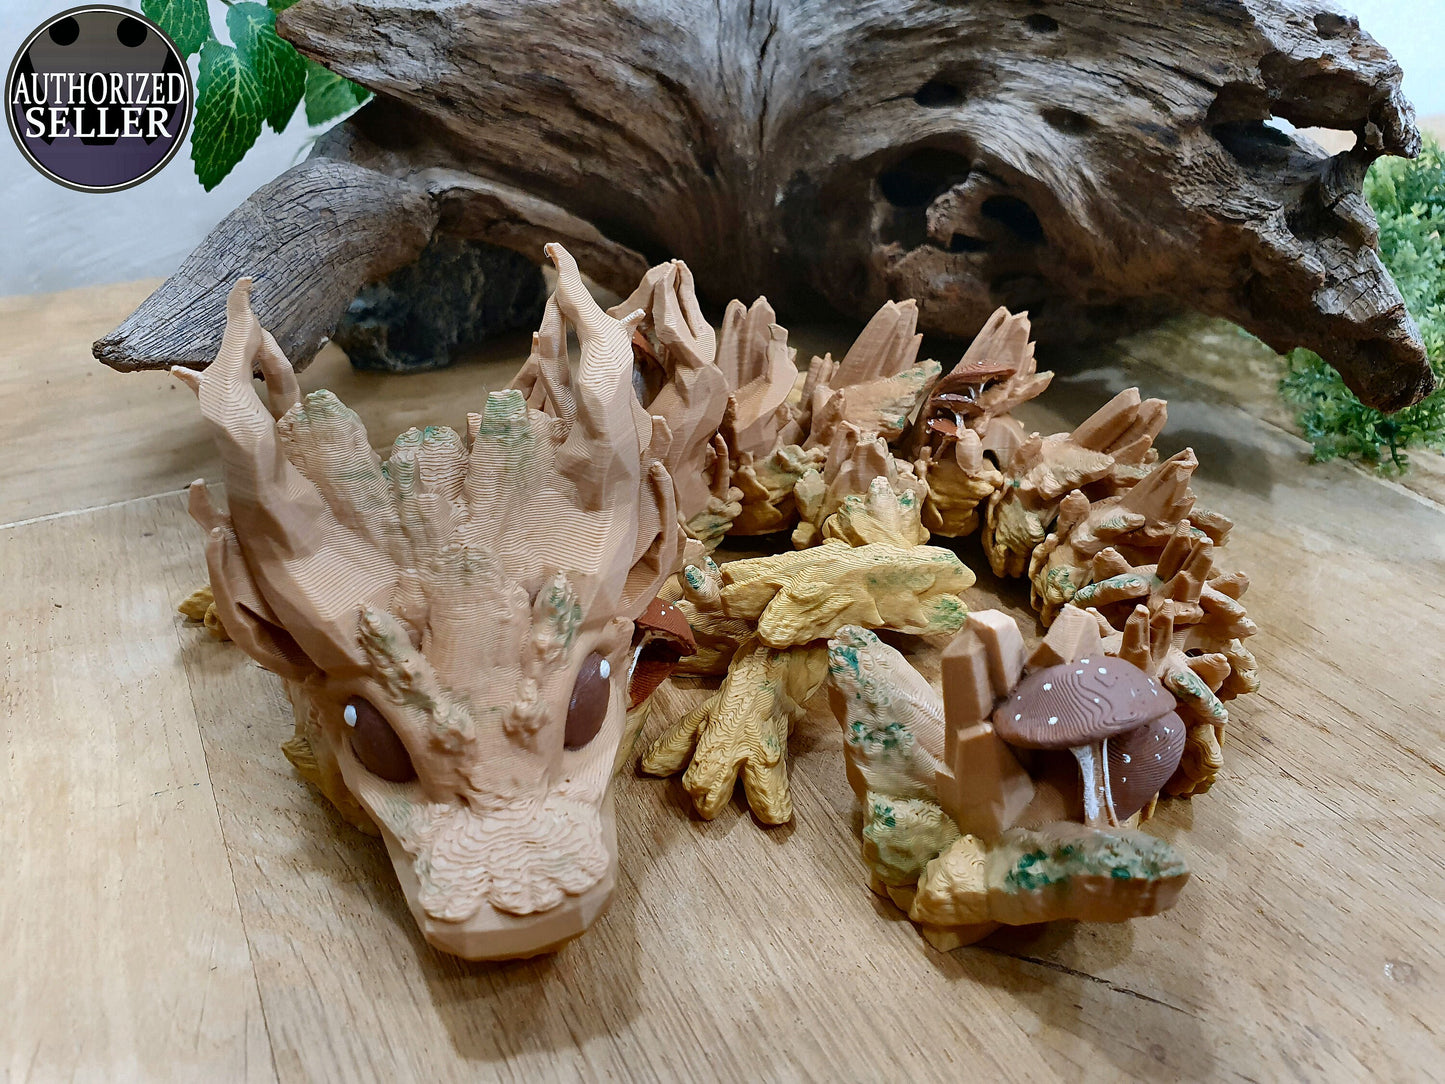 Large Baby Wood Dragon by Cinderwing3D -  Articulated Flexible 3D Print. Professionally Hand painted finishing details